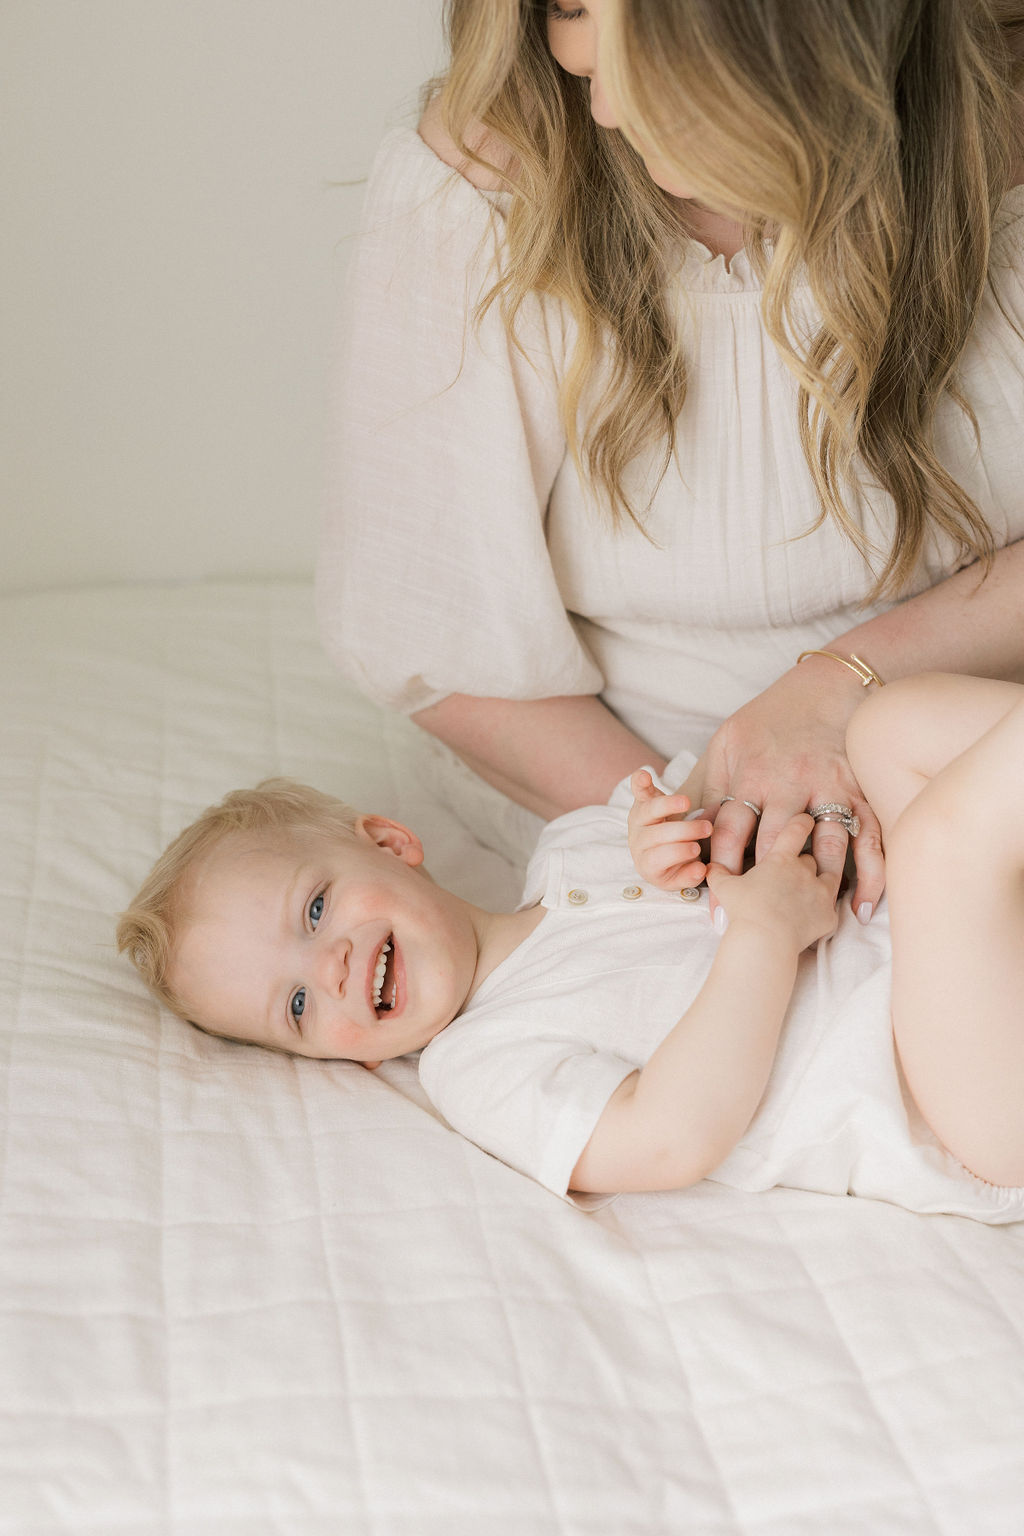 A mother in a white dress sits on a bed tickling her toddler son in a white onesie before meeting a nj au pair